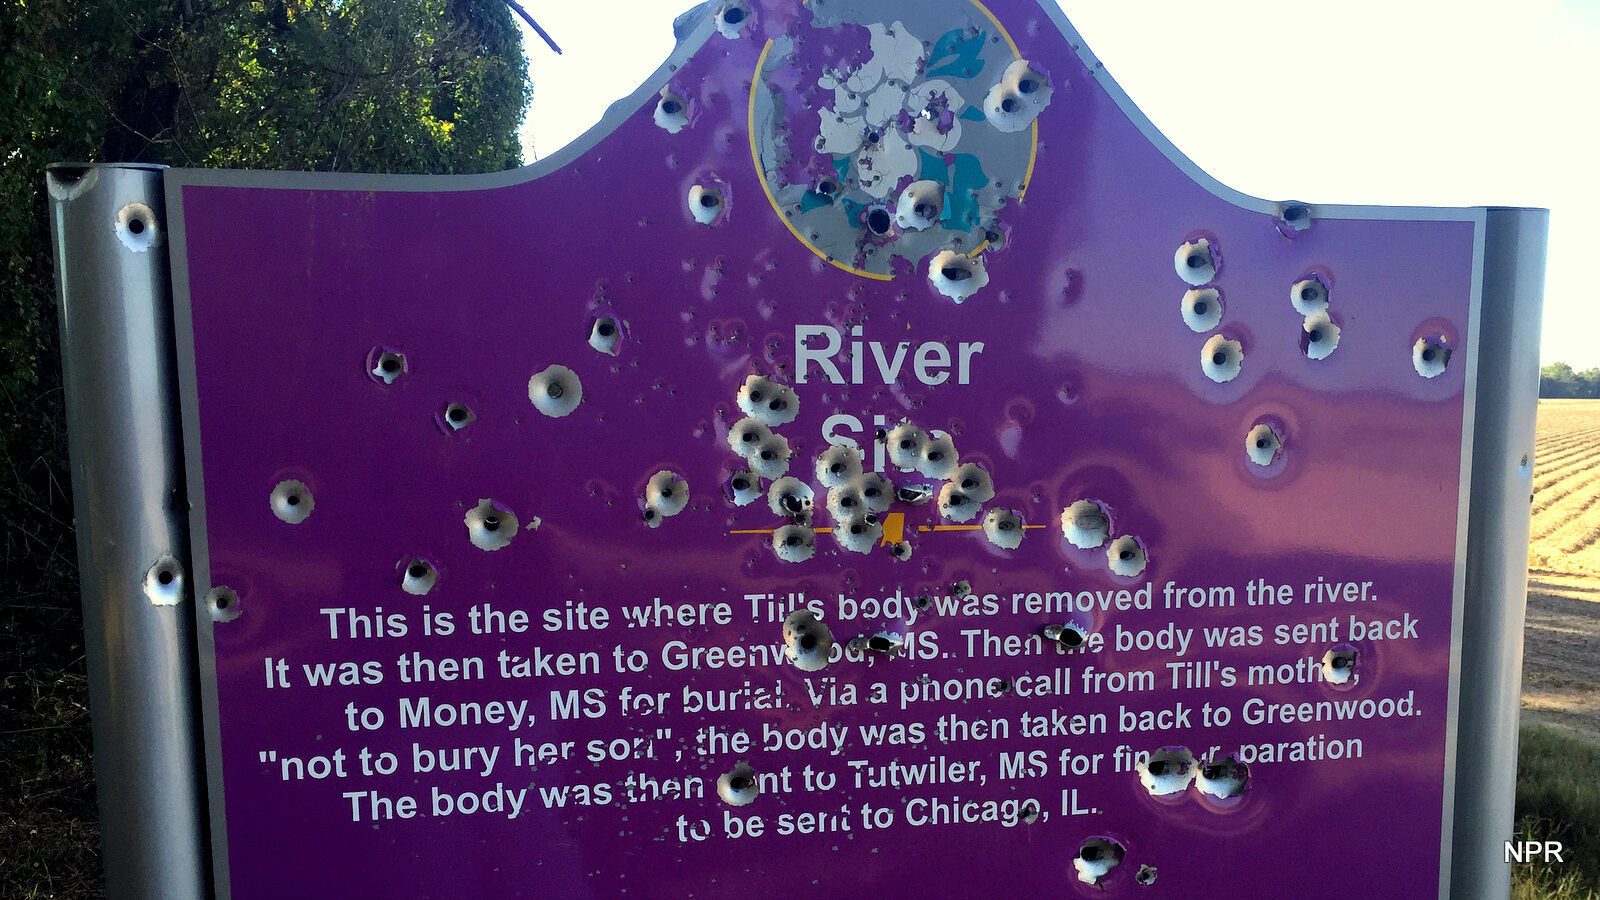 Bullet holes riddle the historical marker at the site where Emmett Till’s body was pulled from the Tallahatchie River in the rural Mississippi Delta.